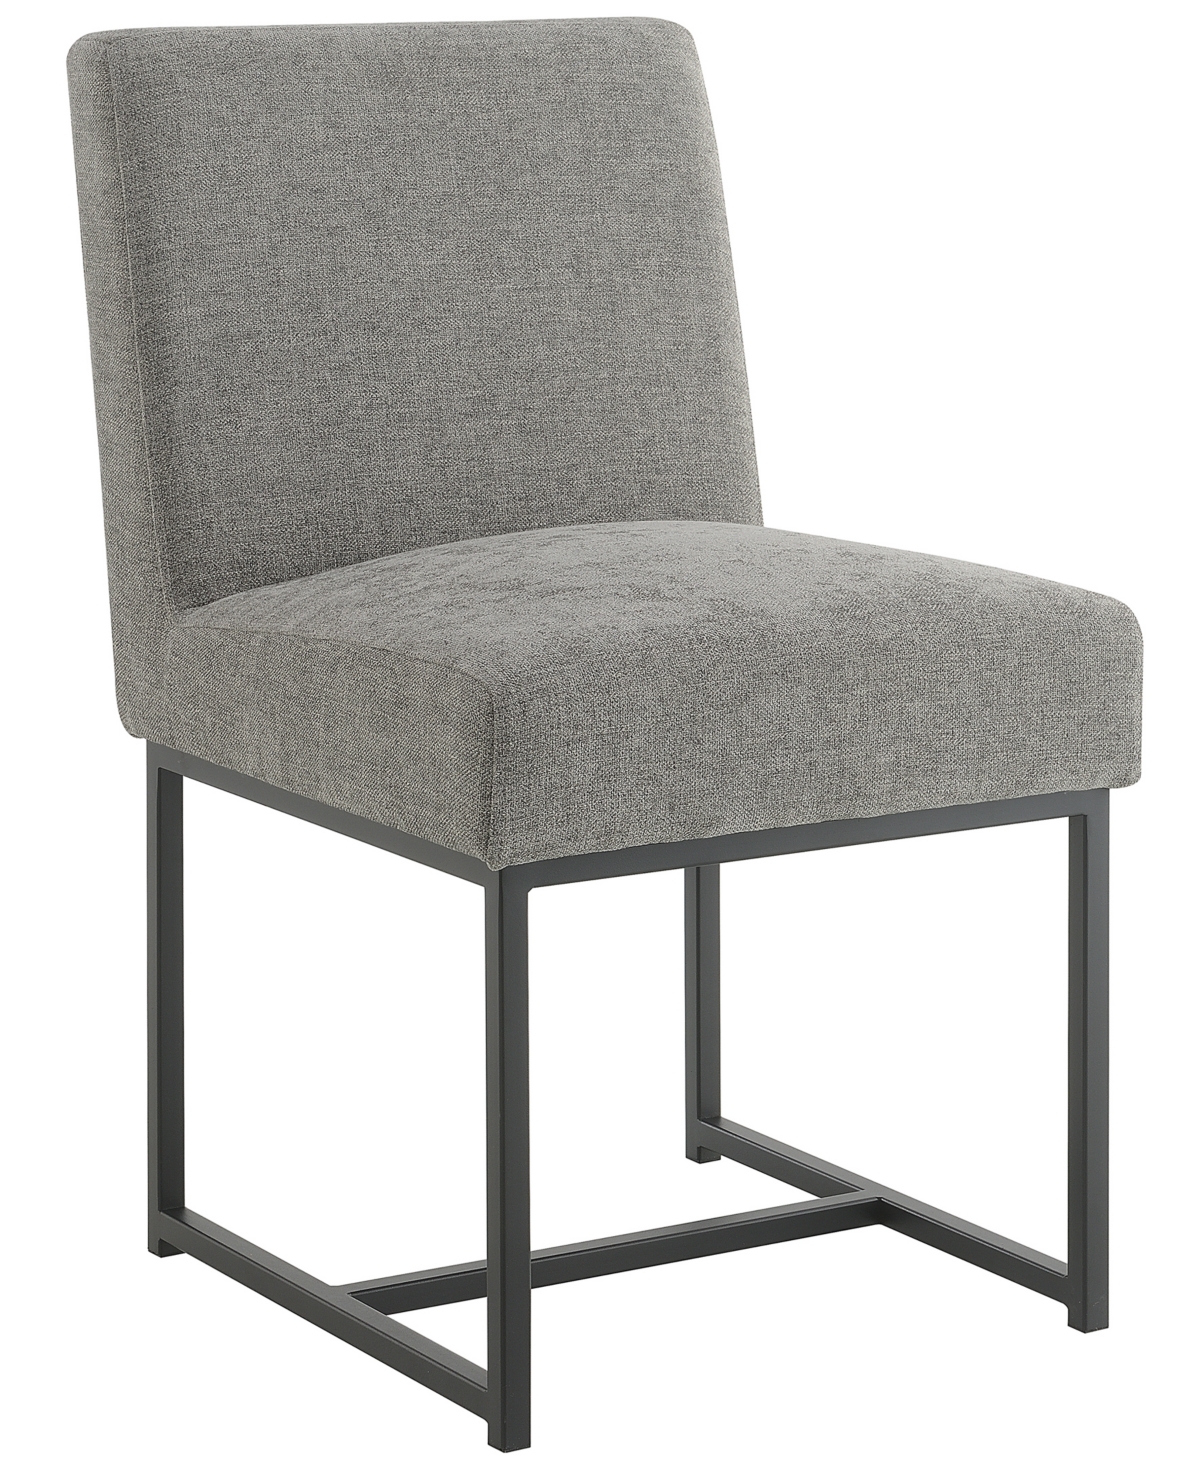 Abbyson Living Luxe 33.5 Fabric Dining Chair In Gray